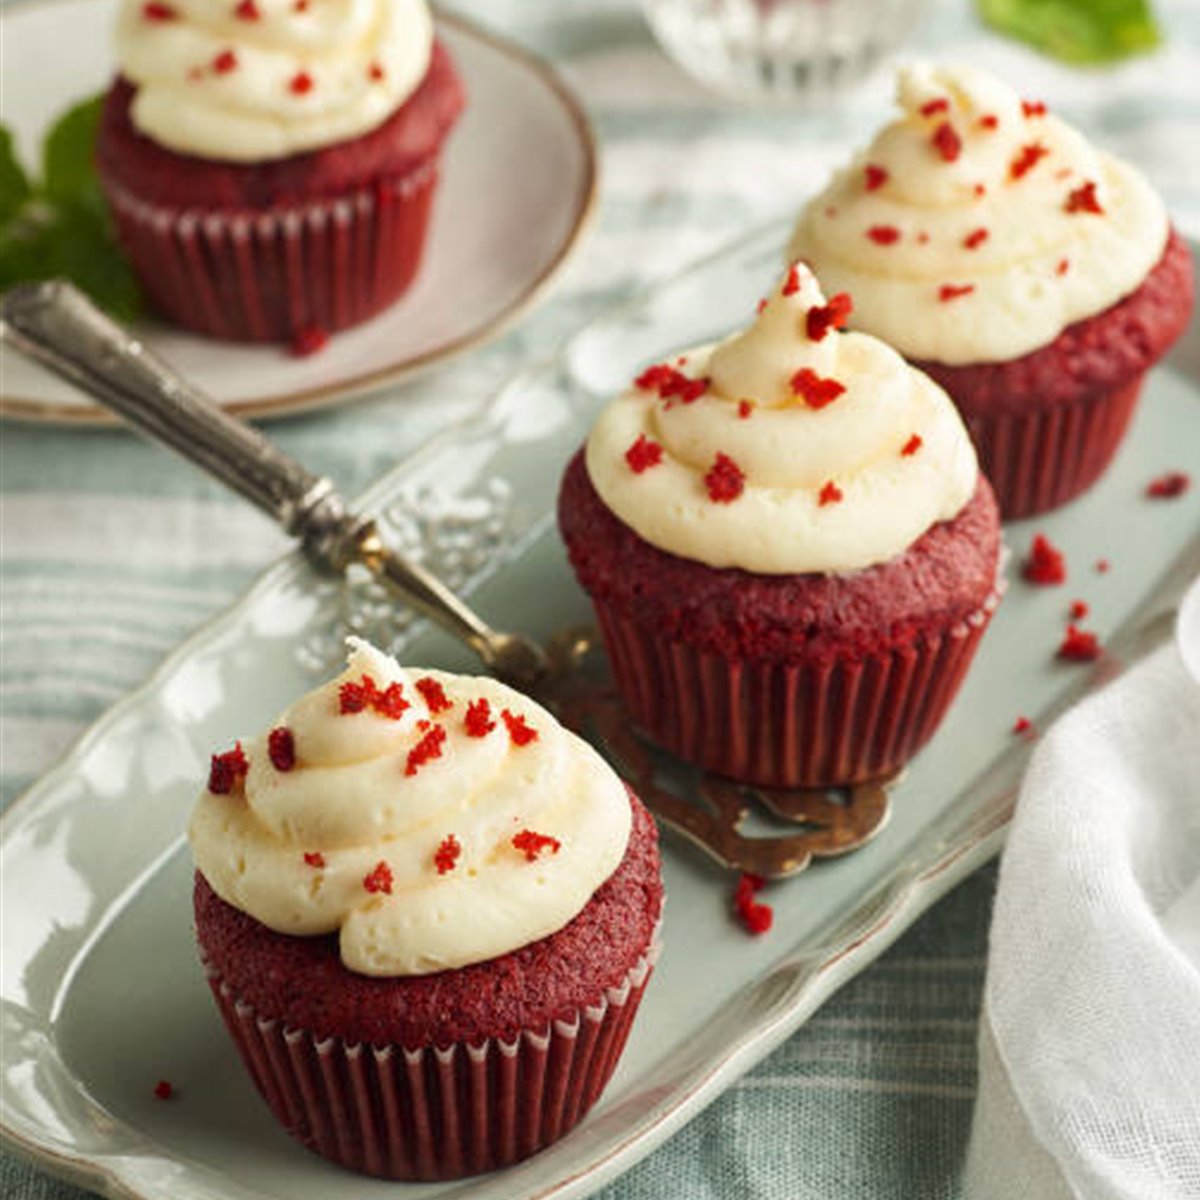 Cupcakes red velvet con frosting de queso - Lecturas